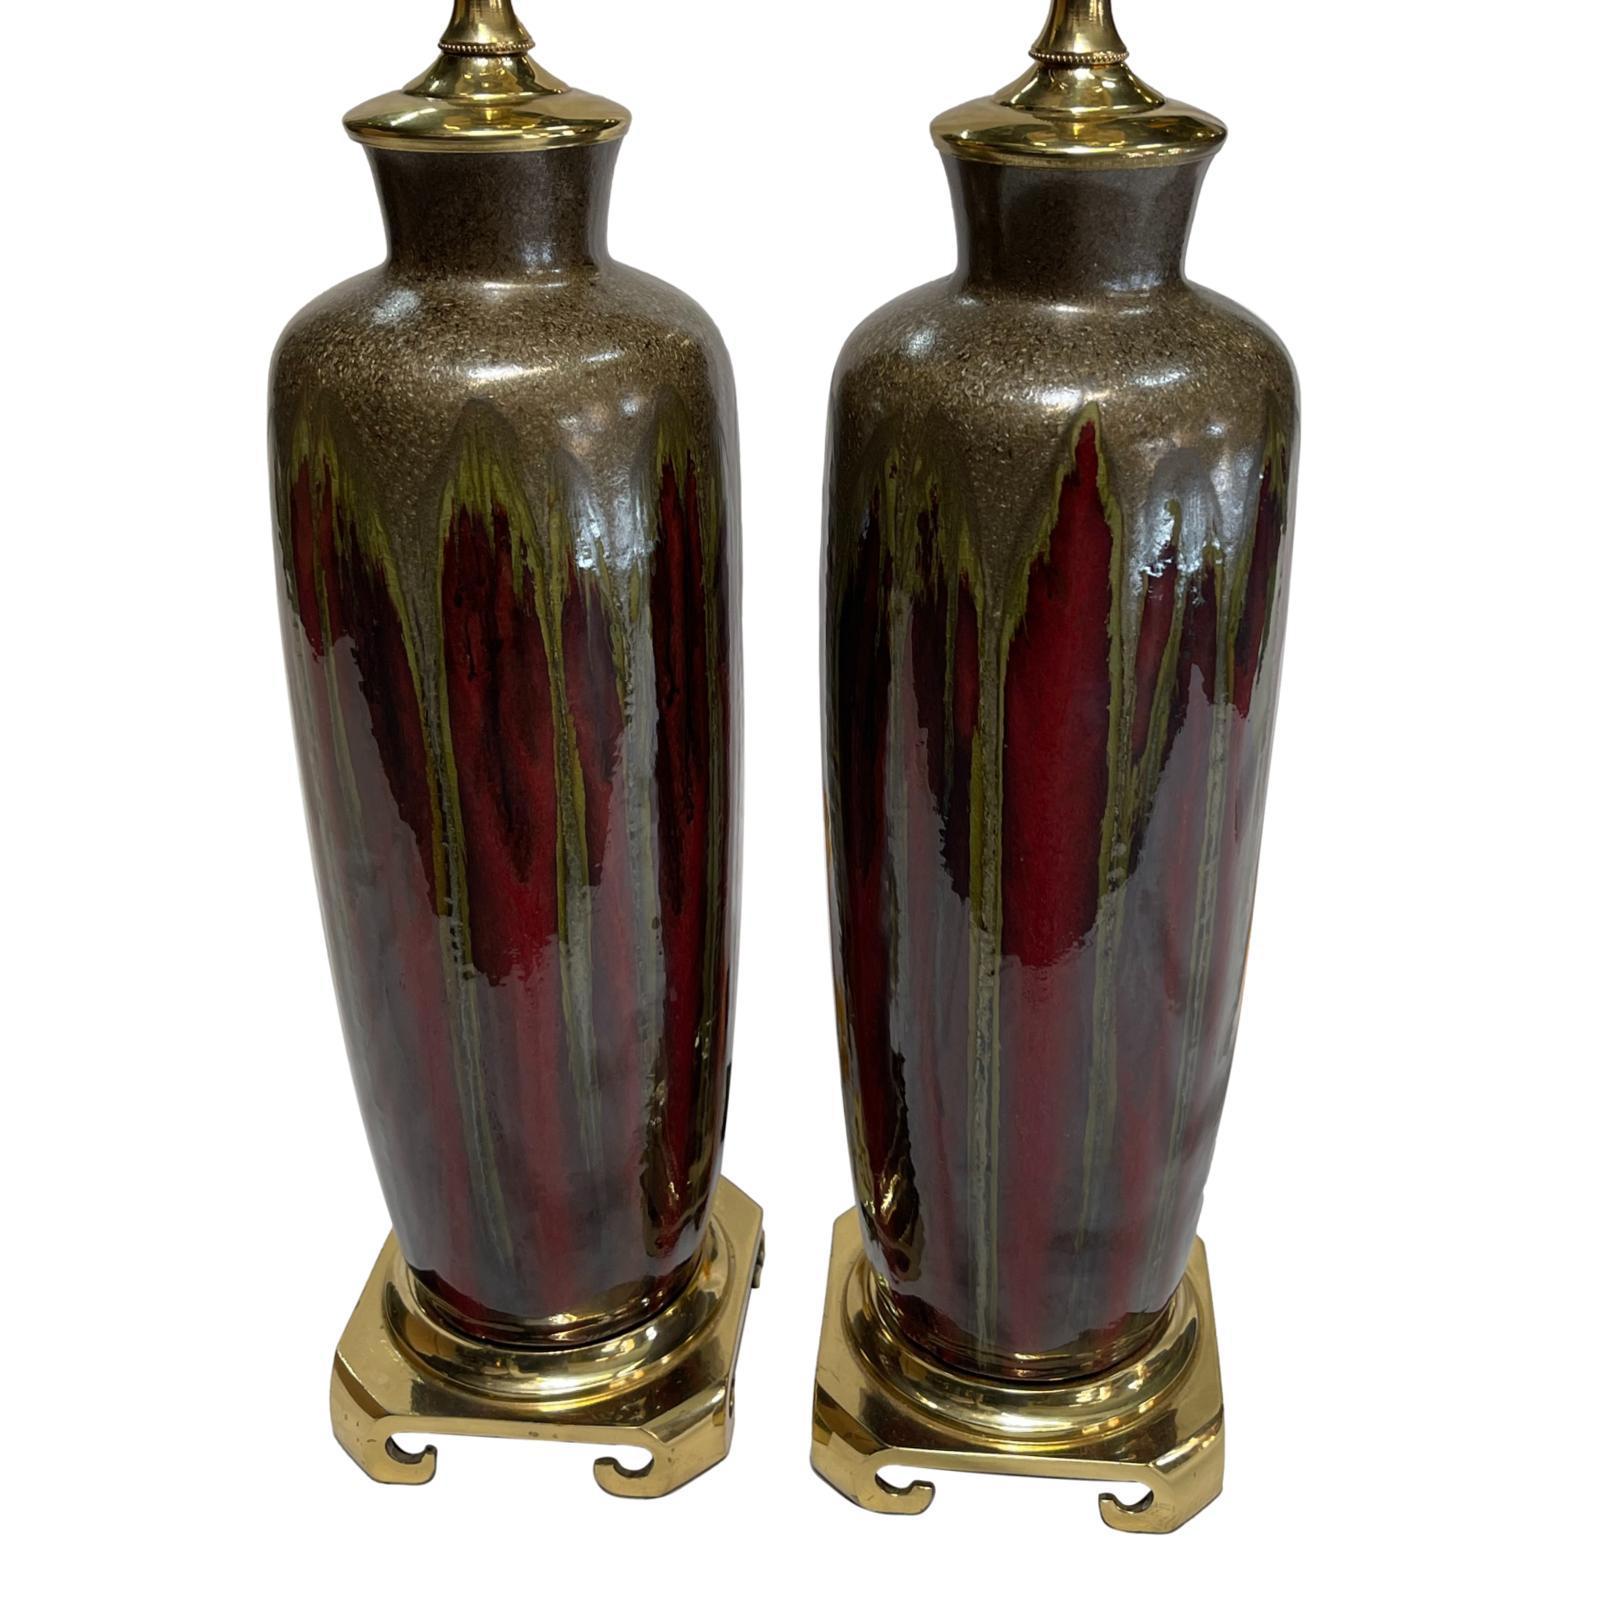 Pair of circa 1950's Italian drip-glazed porcelain table lamps with bronze bases.

Measurements:
Height of body: 15